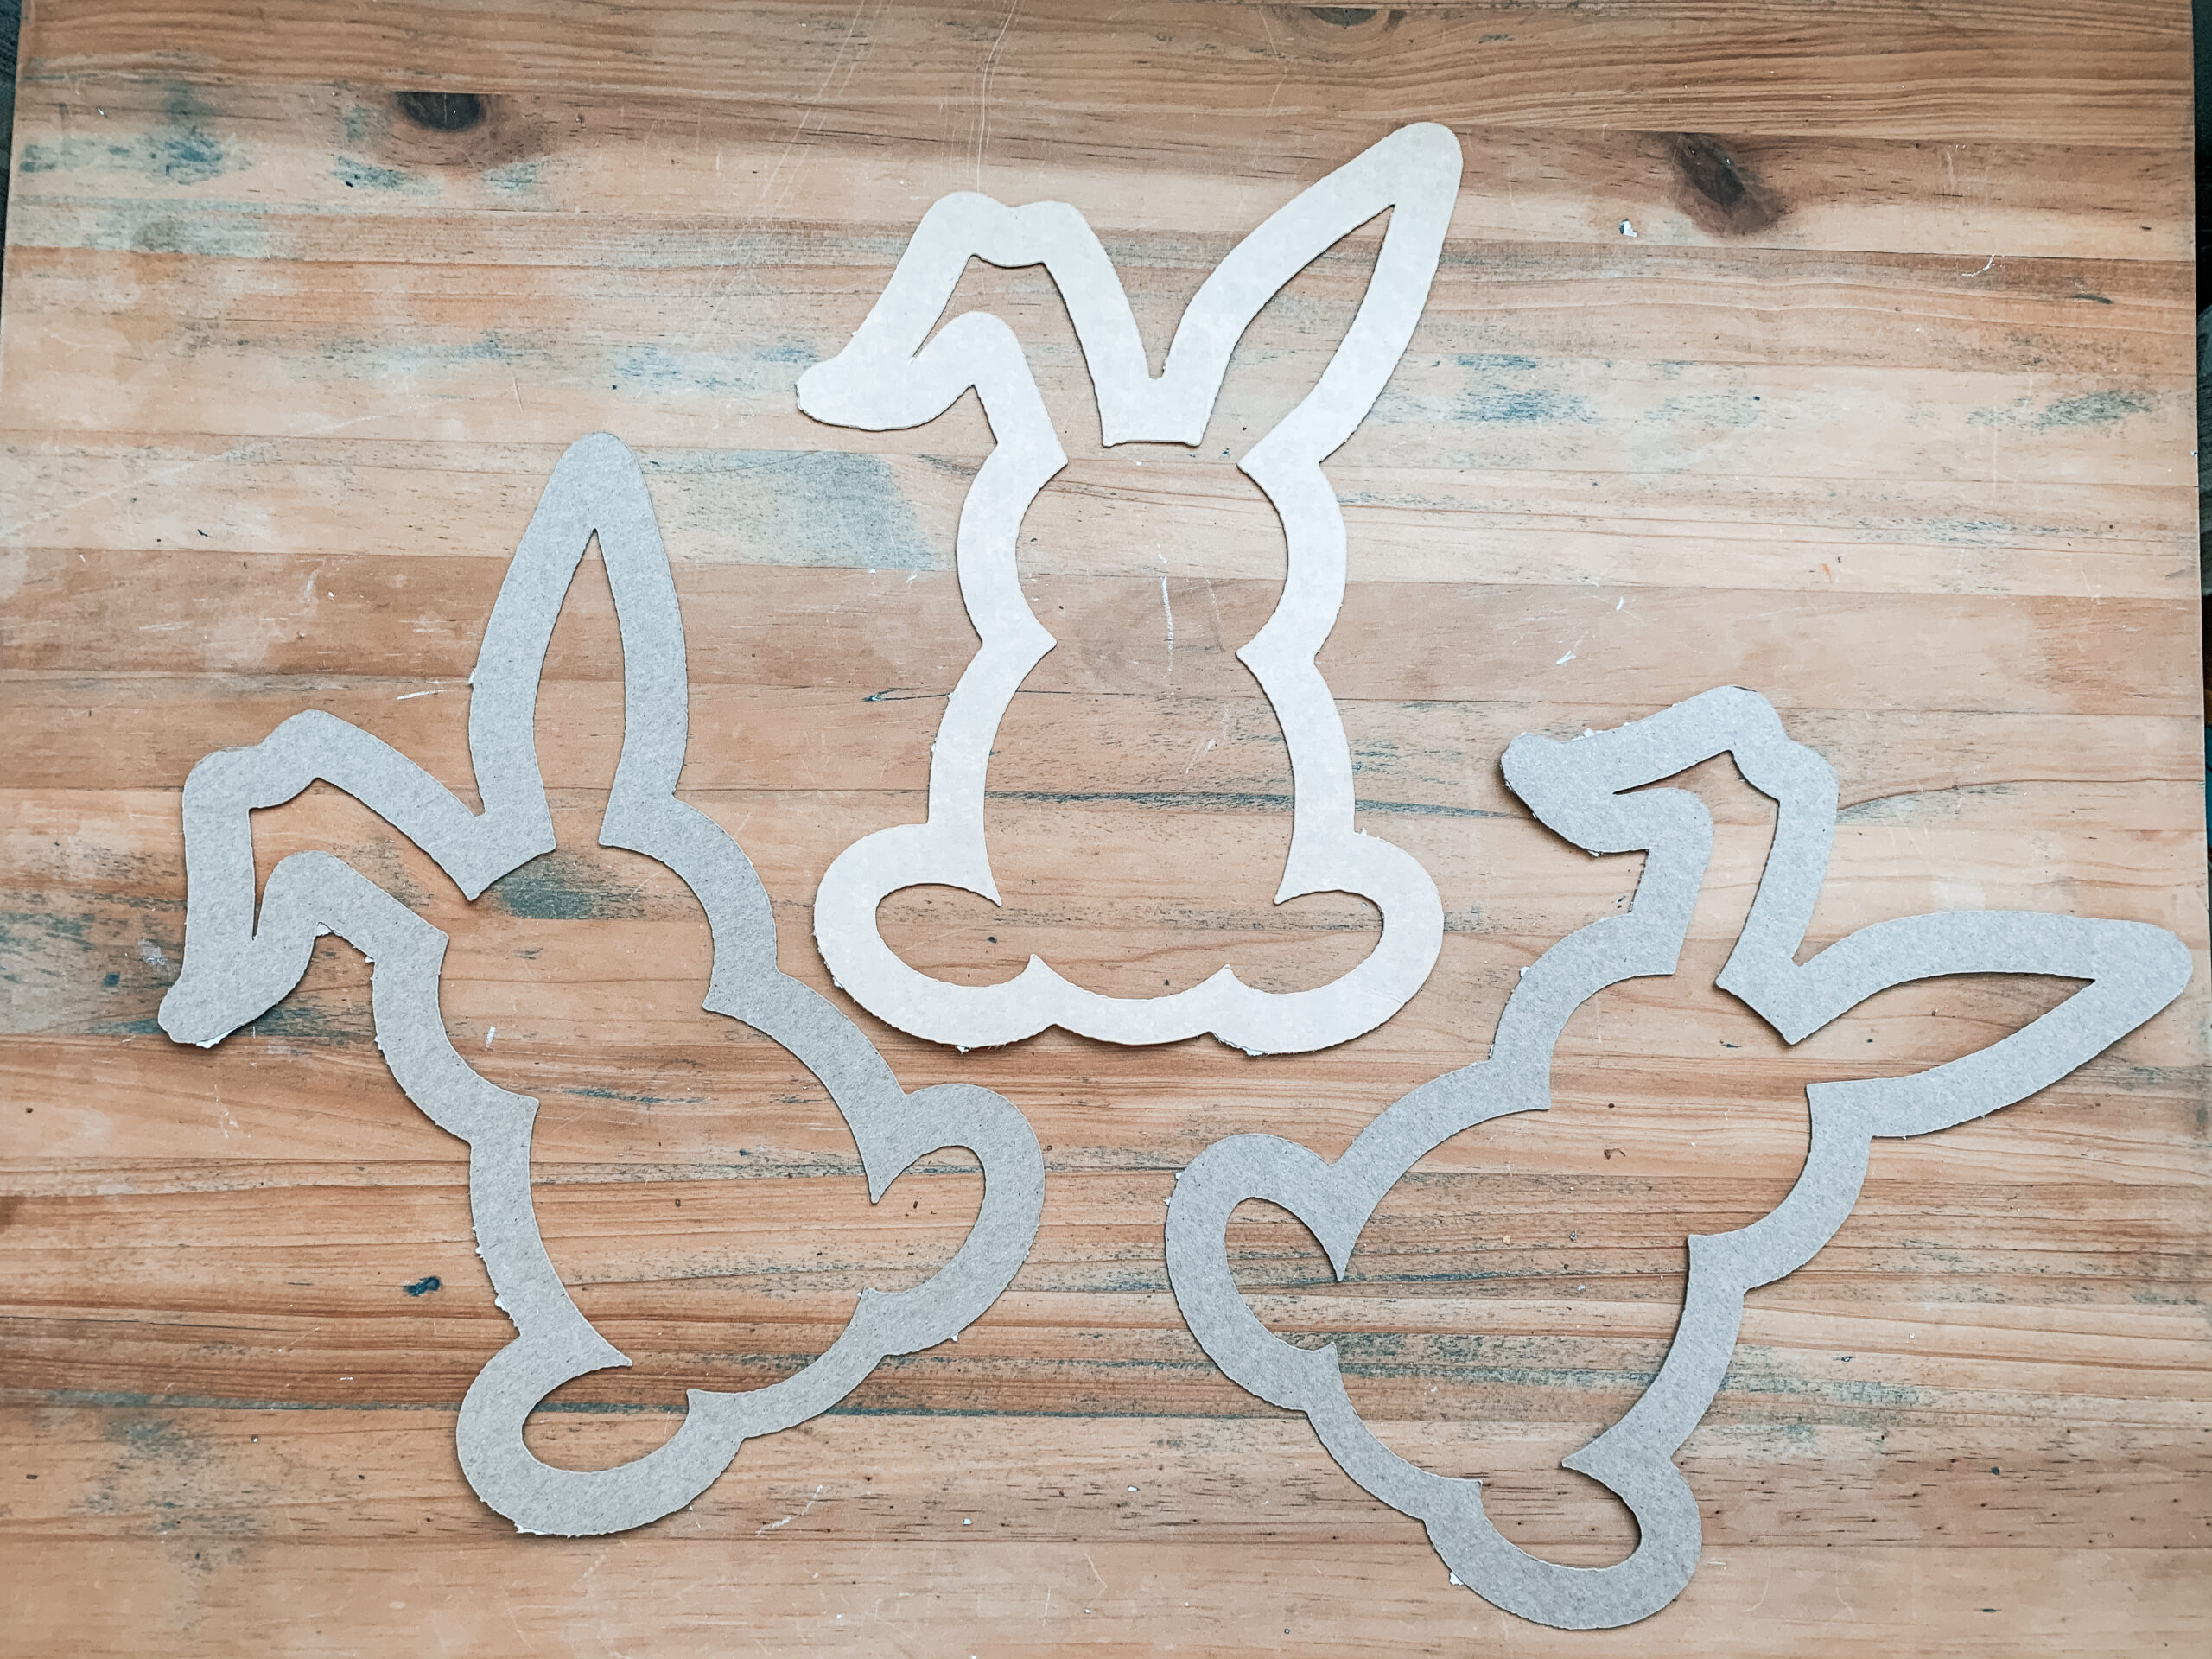 Easter bunny outline made of cardboard for kids color learning activity craft